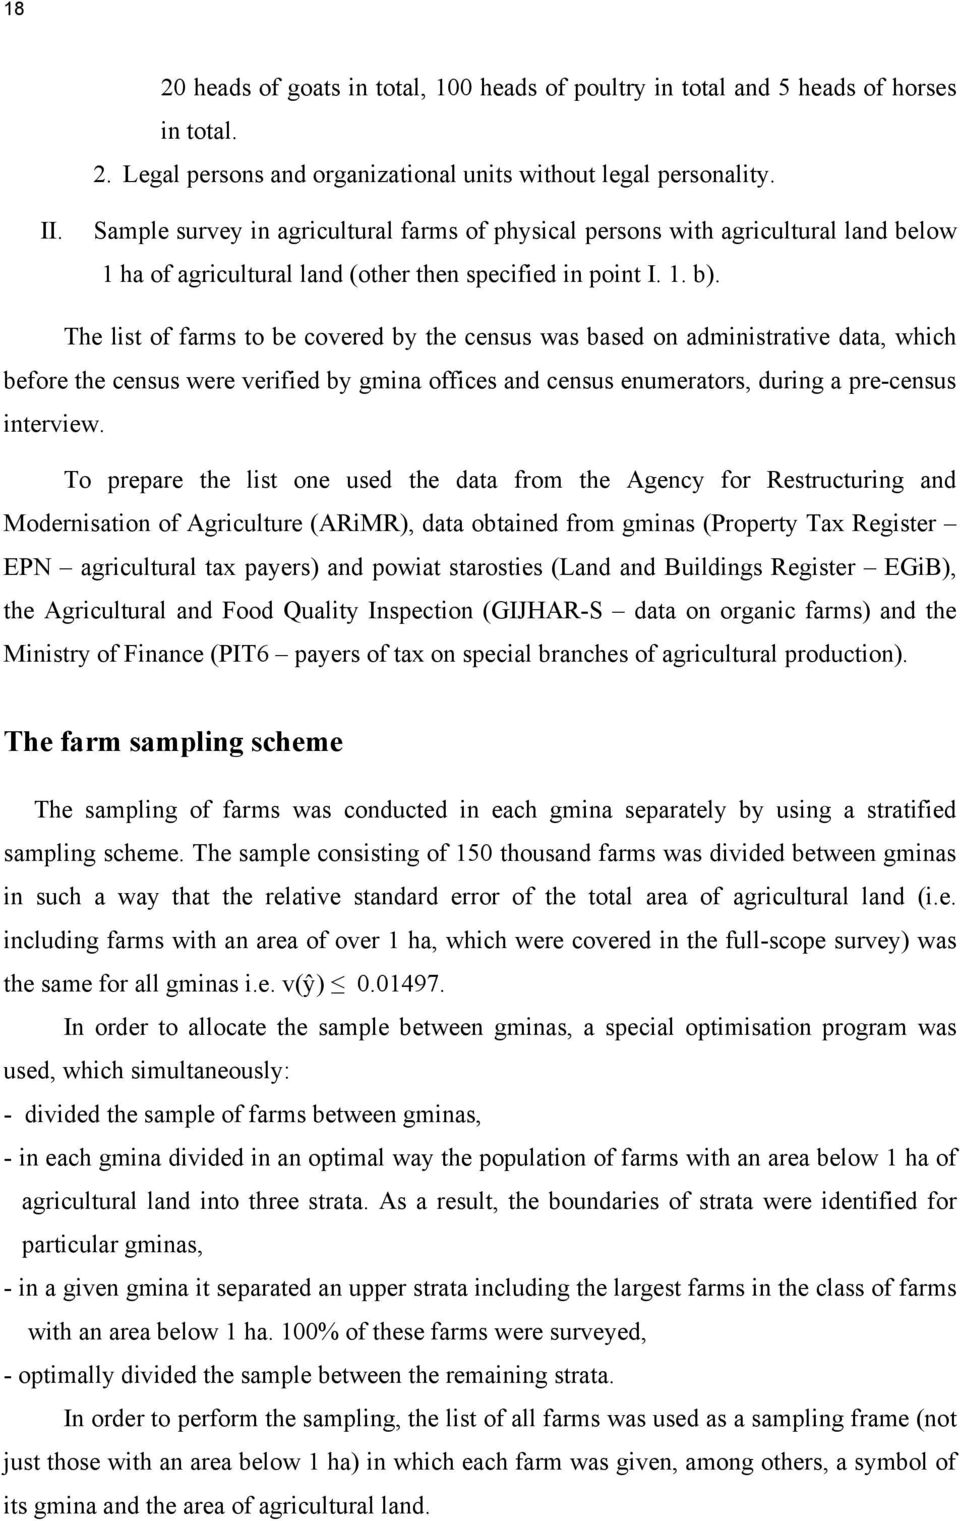 The list of farms to be covered by the census was based on administrative data, which before the census were verified by gmina offices and census enumerators, during a pre-census interview.